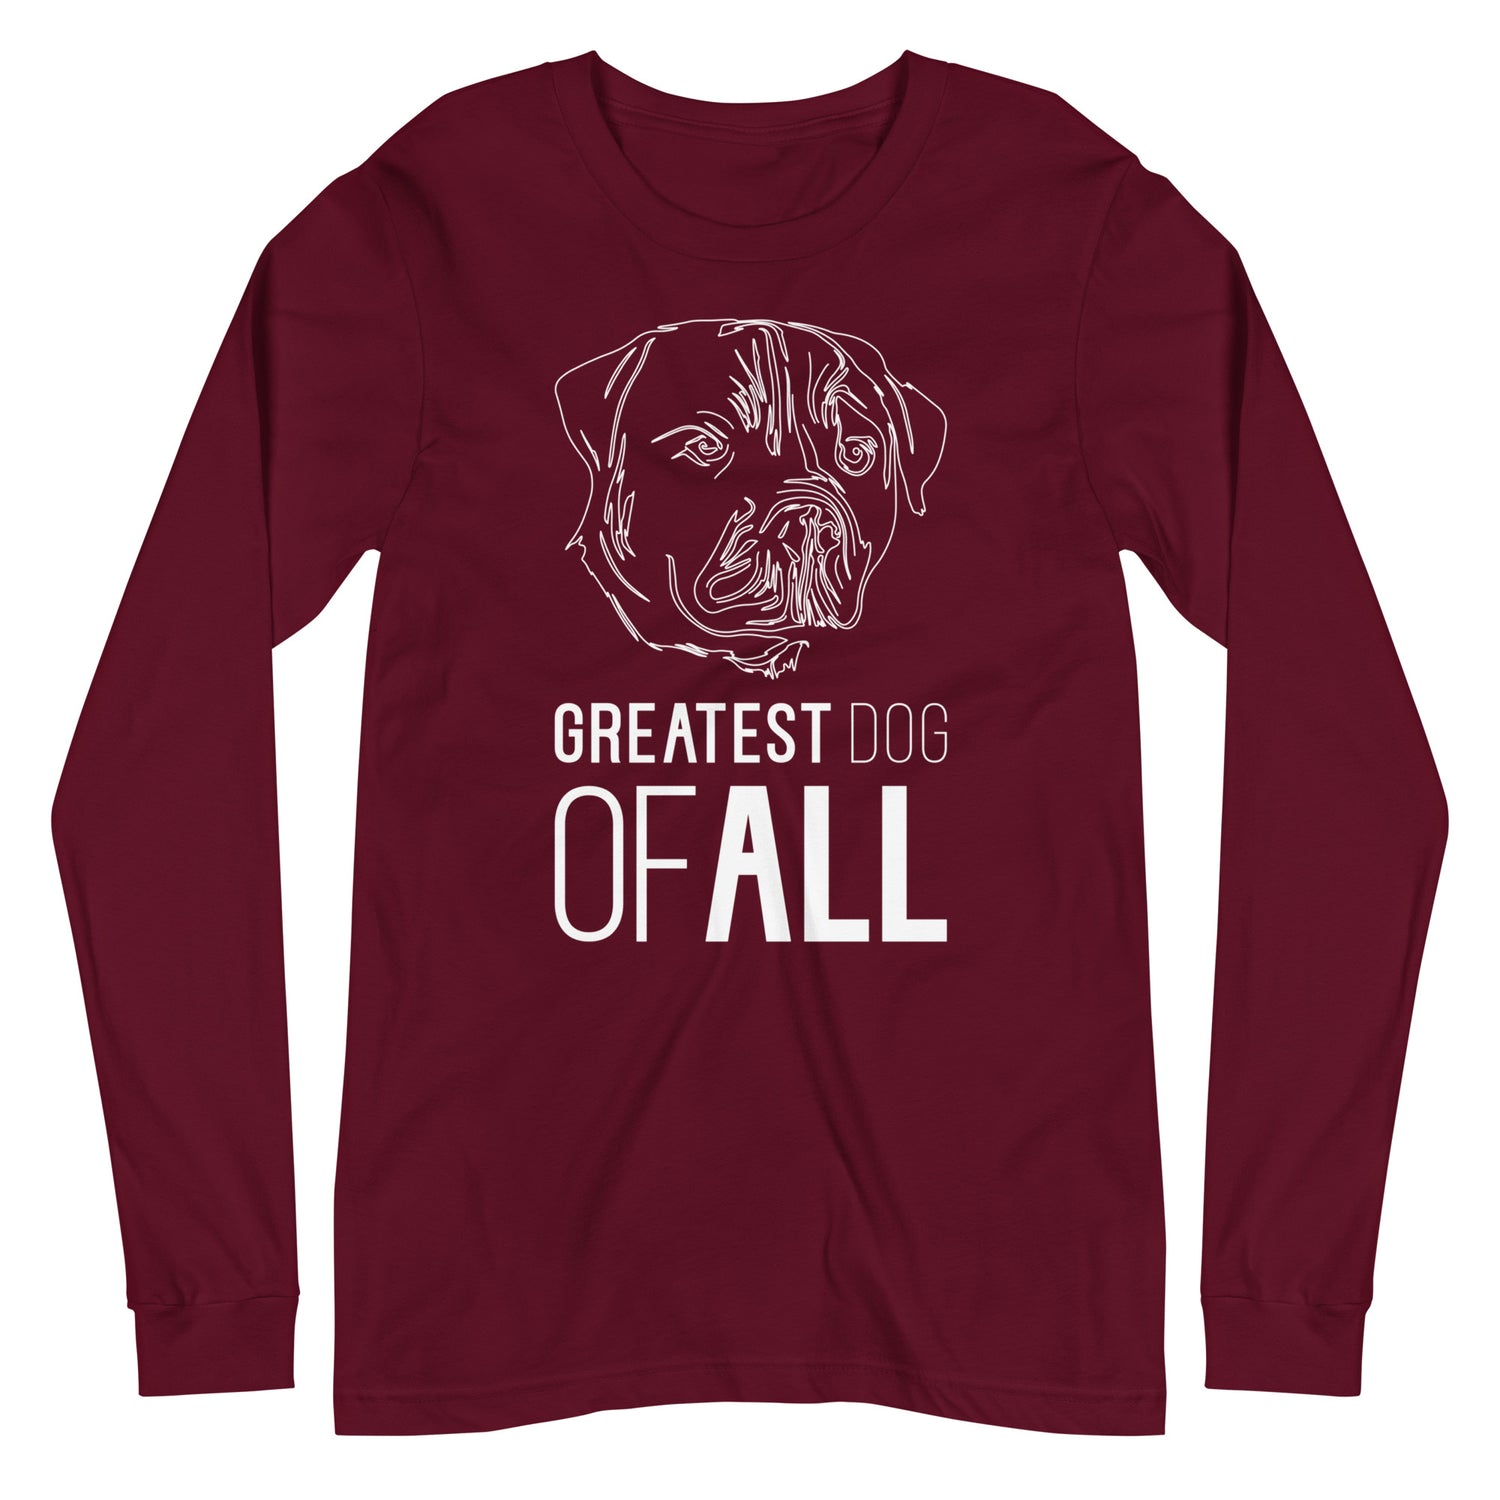 White line Rottweiler face with Greatest Dog of All caption on unisex maroon long sleeve t-shirt